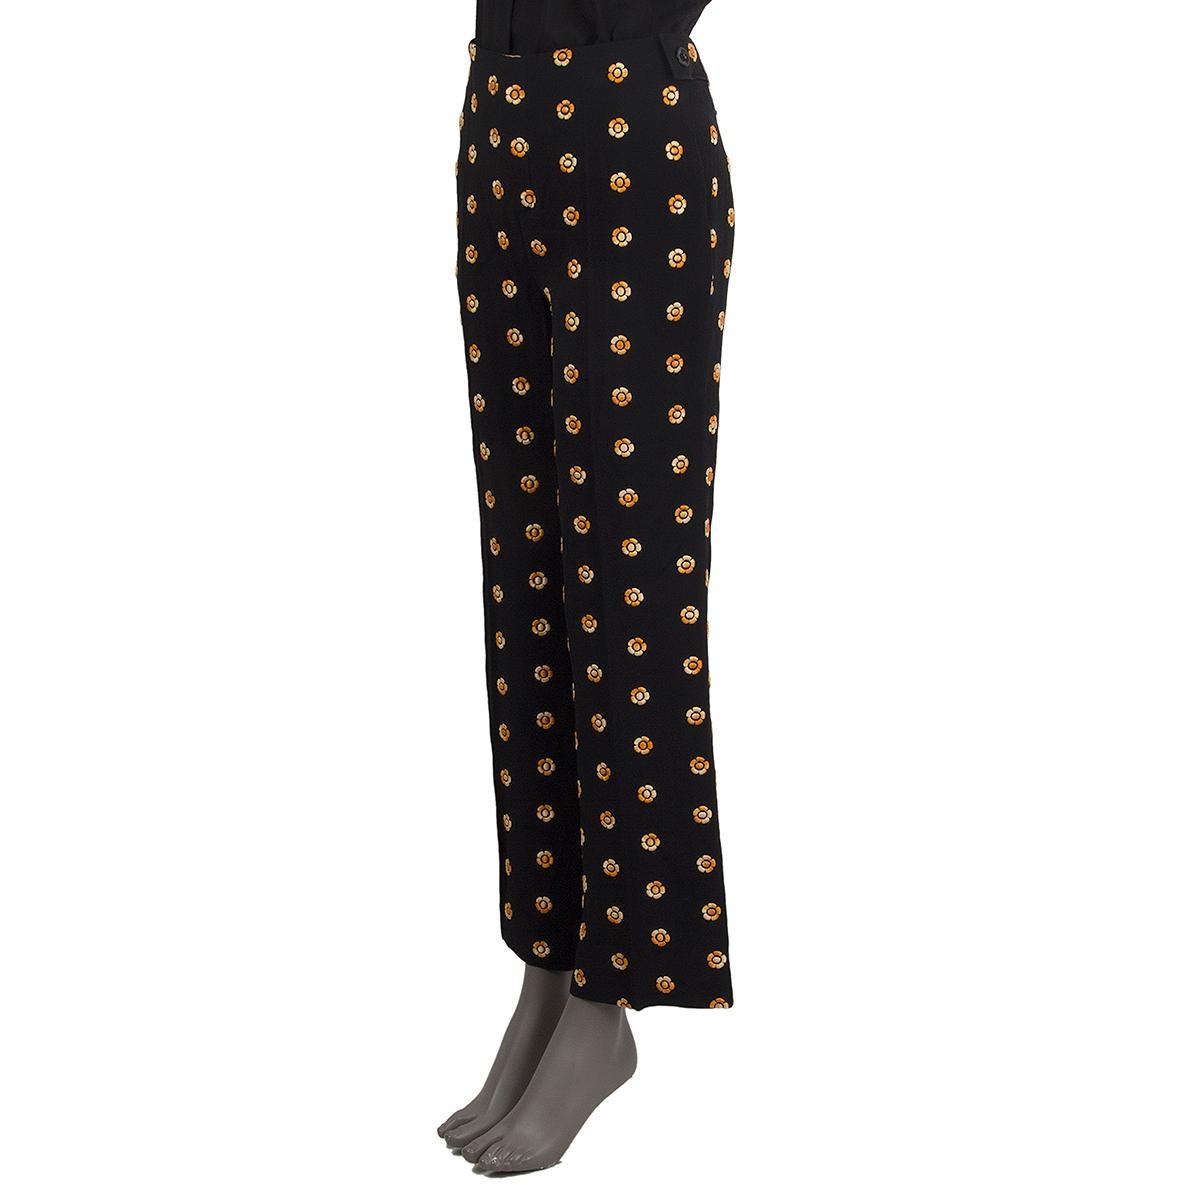 100% authentic Chloé flower embroidered pants in black and yellow acetate (53%) and viscose (47%) with pockets. Close on the front with a zipper and hook fasteners. Partially lined in acetate (70%) and silk (30%). Have been worn and are in excellent